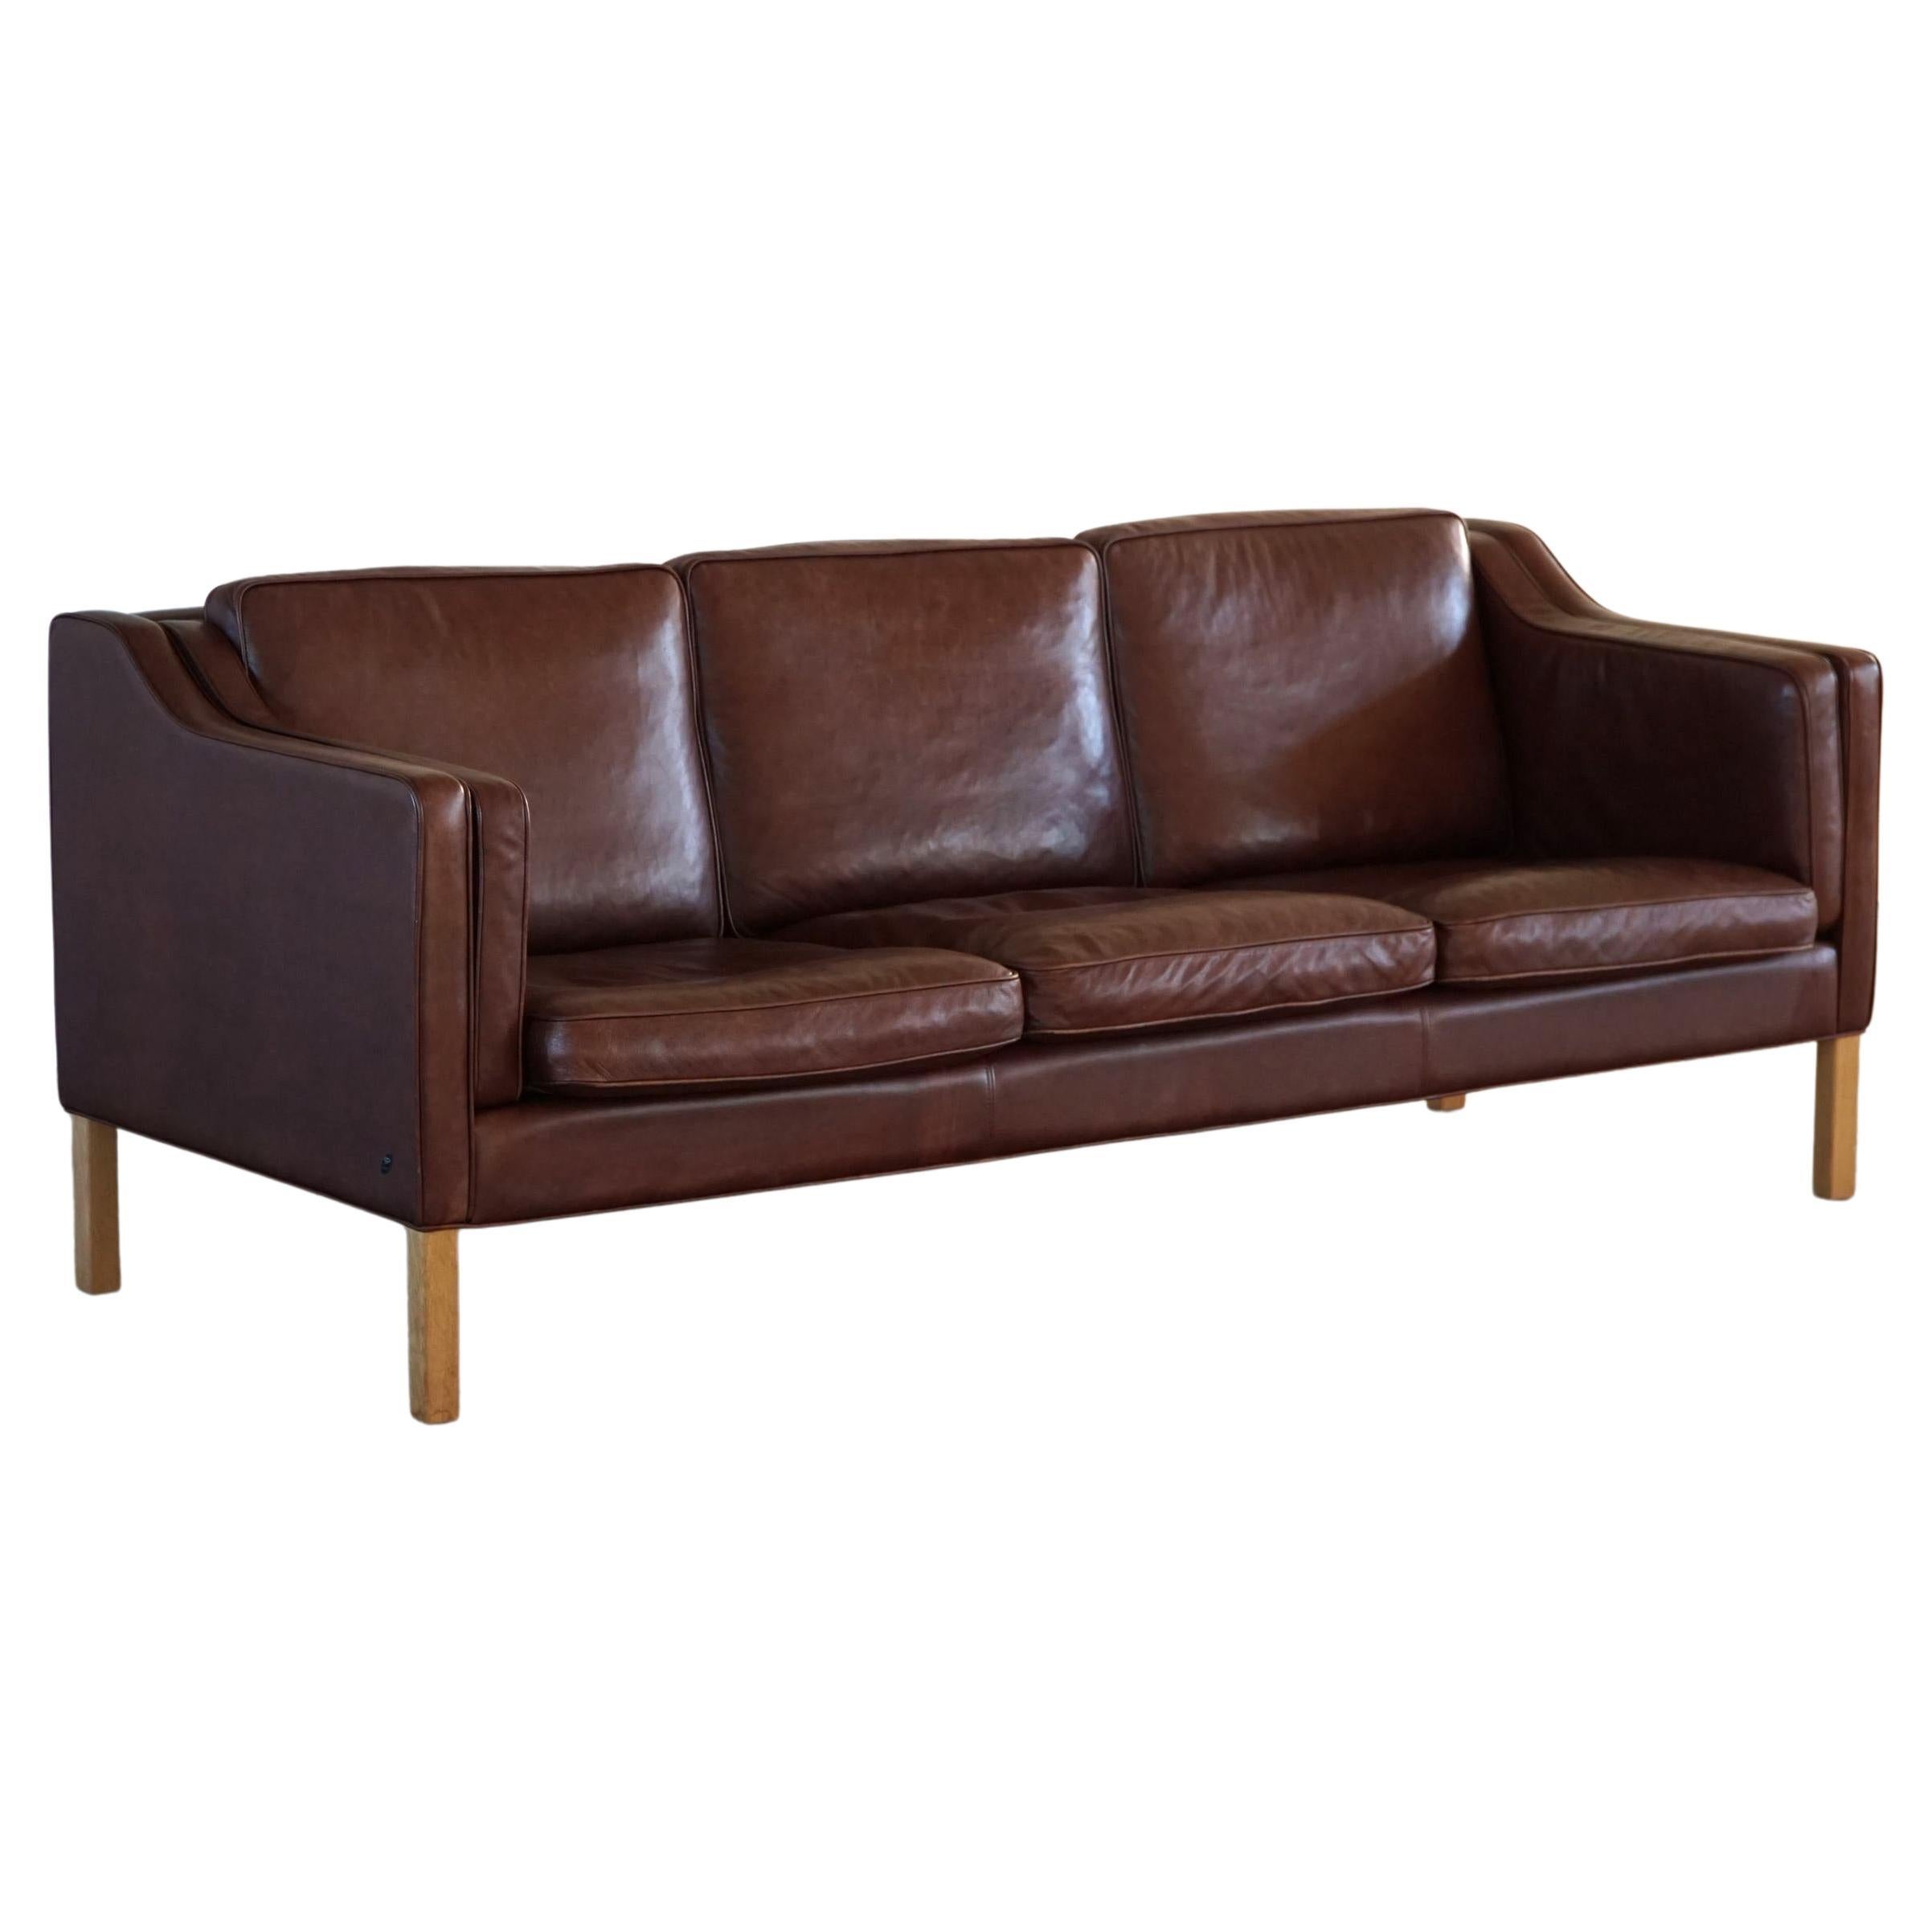 Hurup Møbelfabrik, Mid Century Three Seater Sofa in Brown Leather, Made in 1970s For Sale